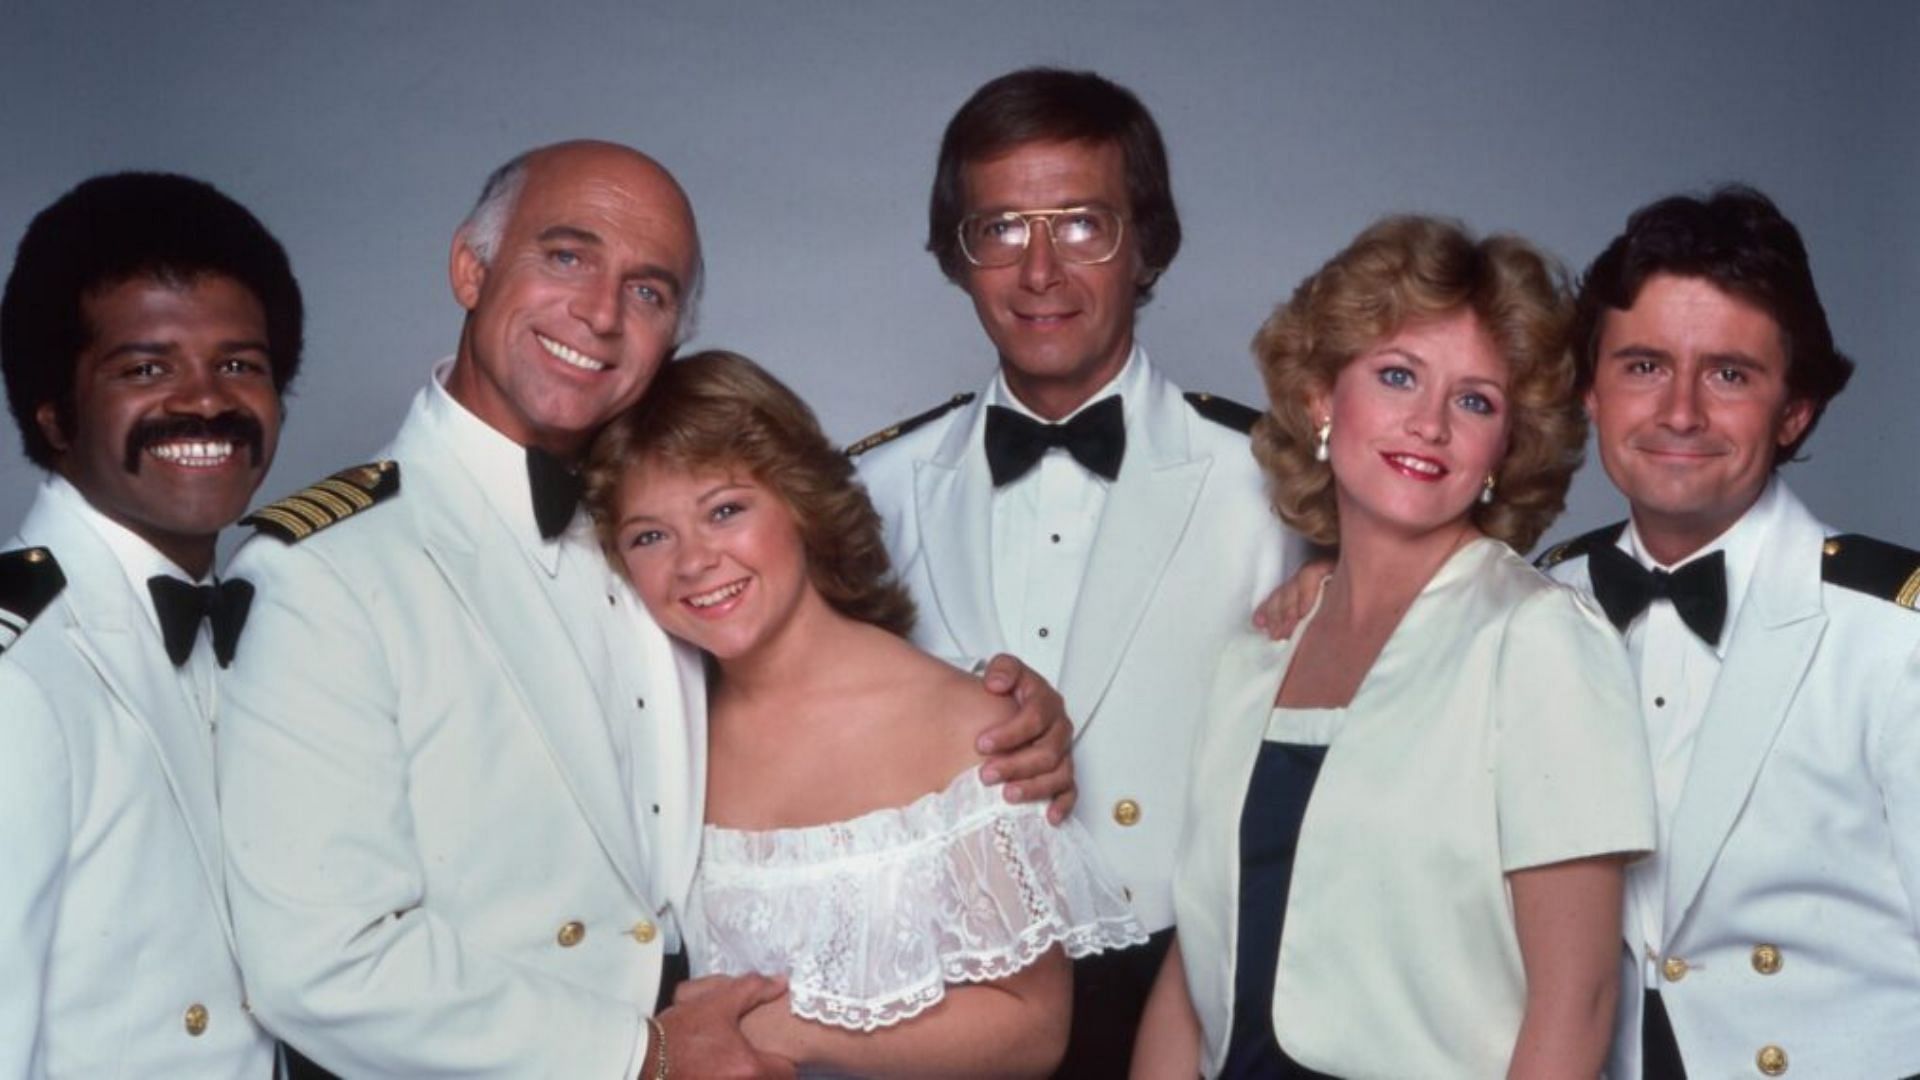 The Love Boat is a legendary ABC sitcom